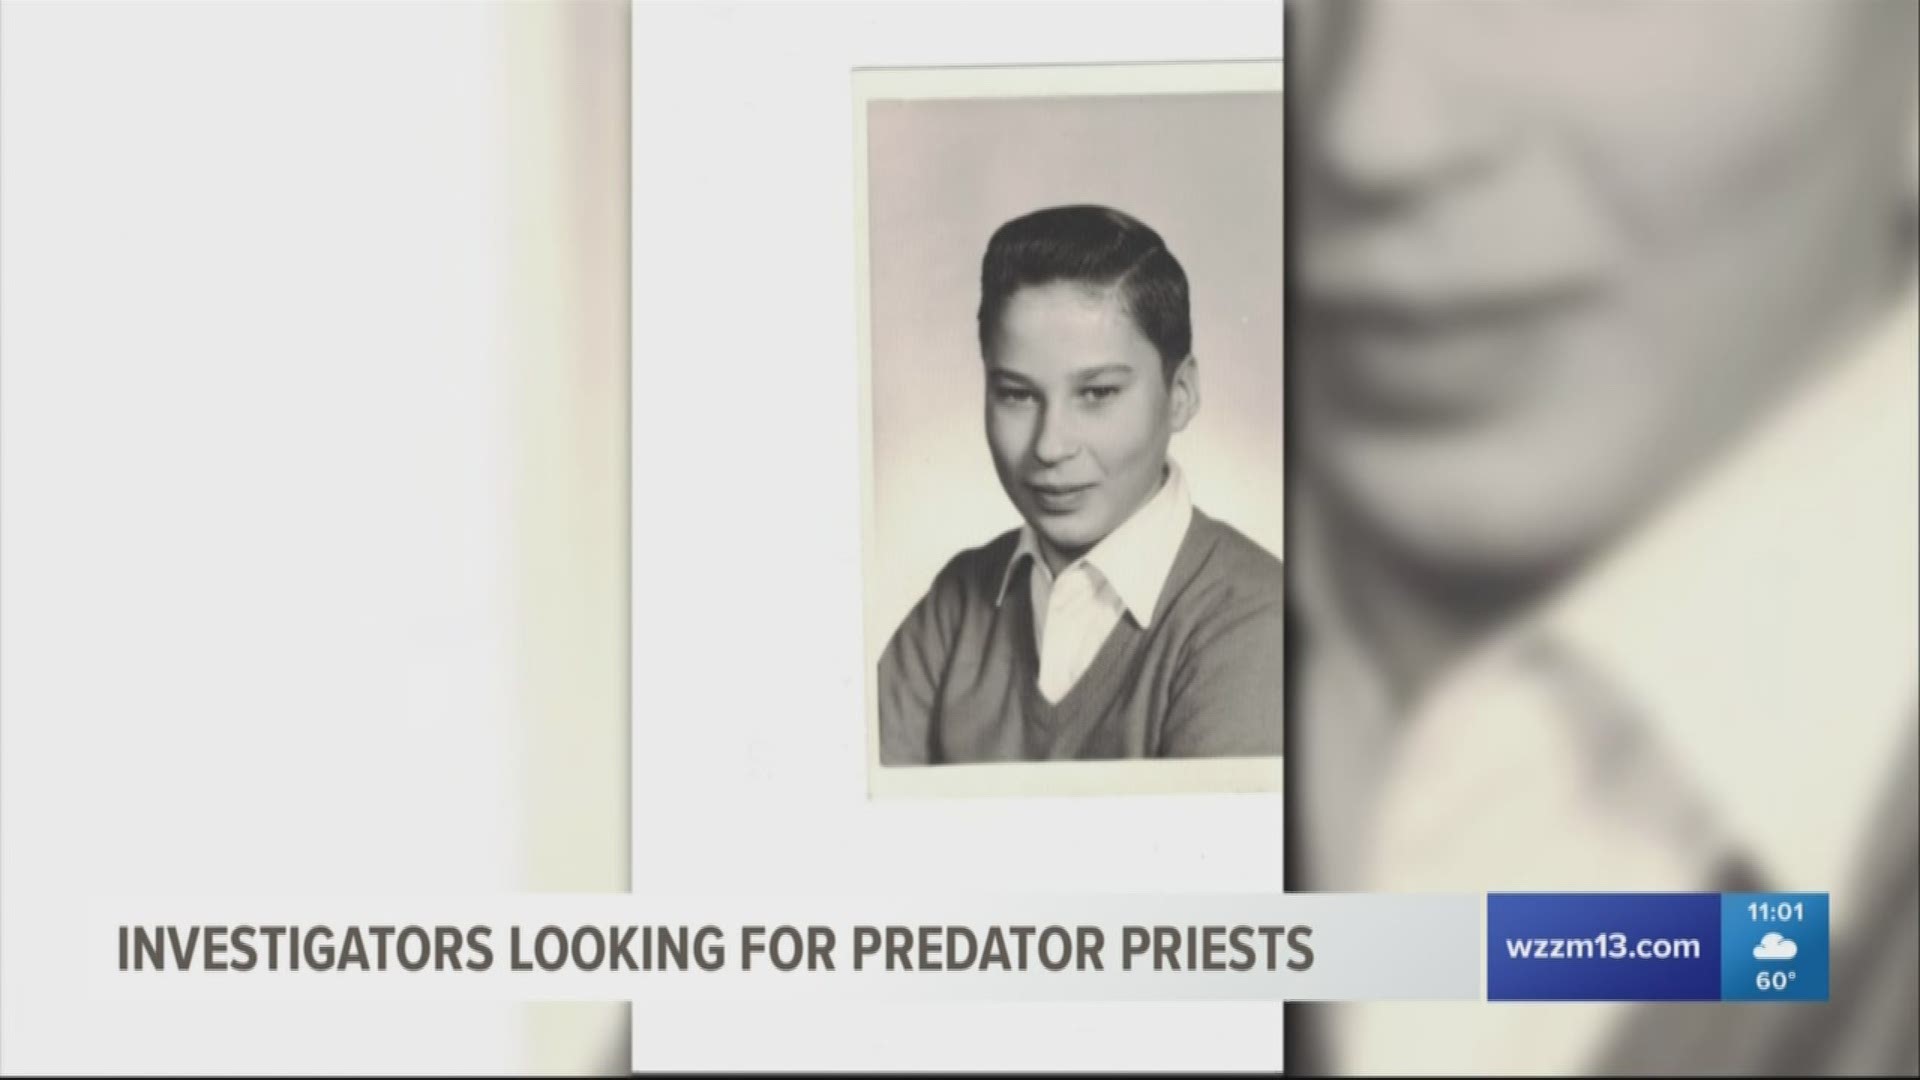 Former altar boy speaks out about Catholic clergy abuse